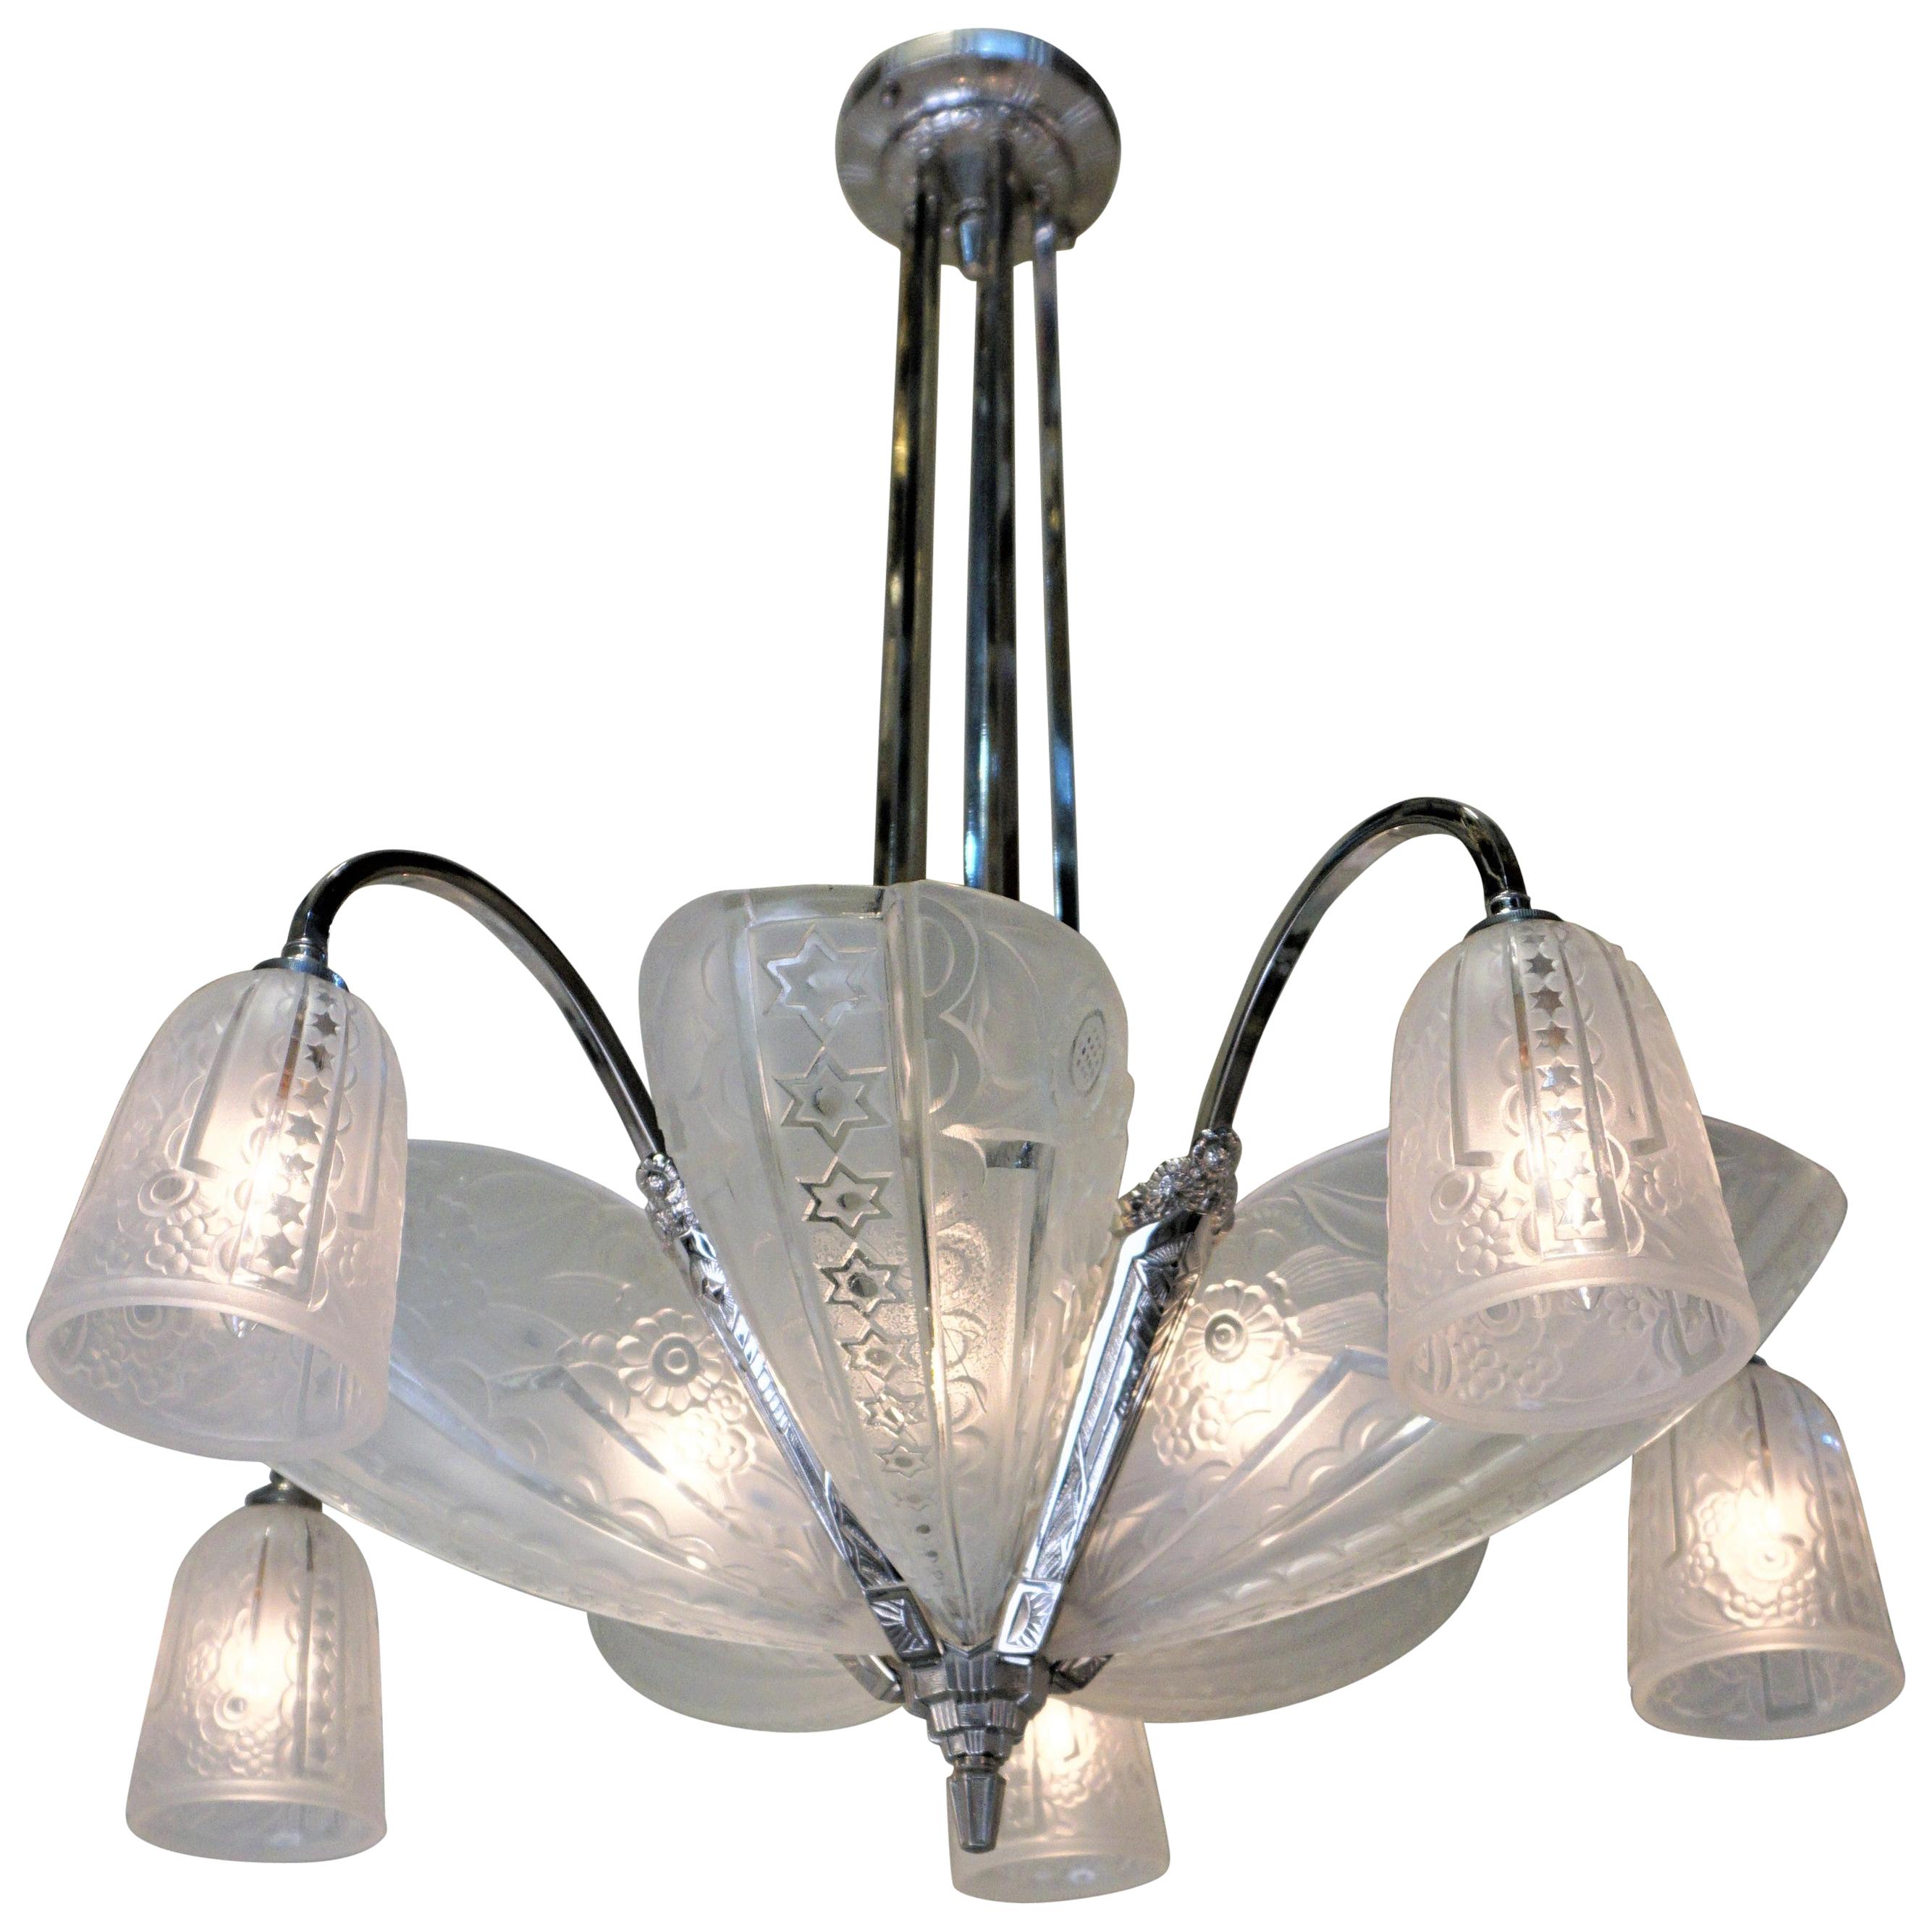 French 1930s Art Deco Chandelier by Donna Paris